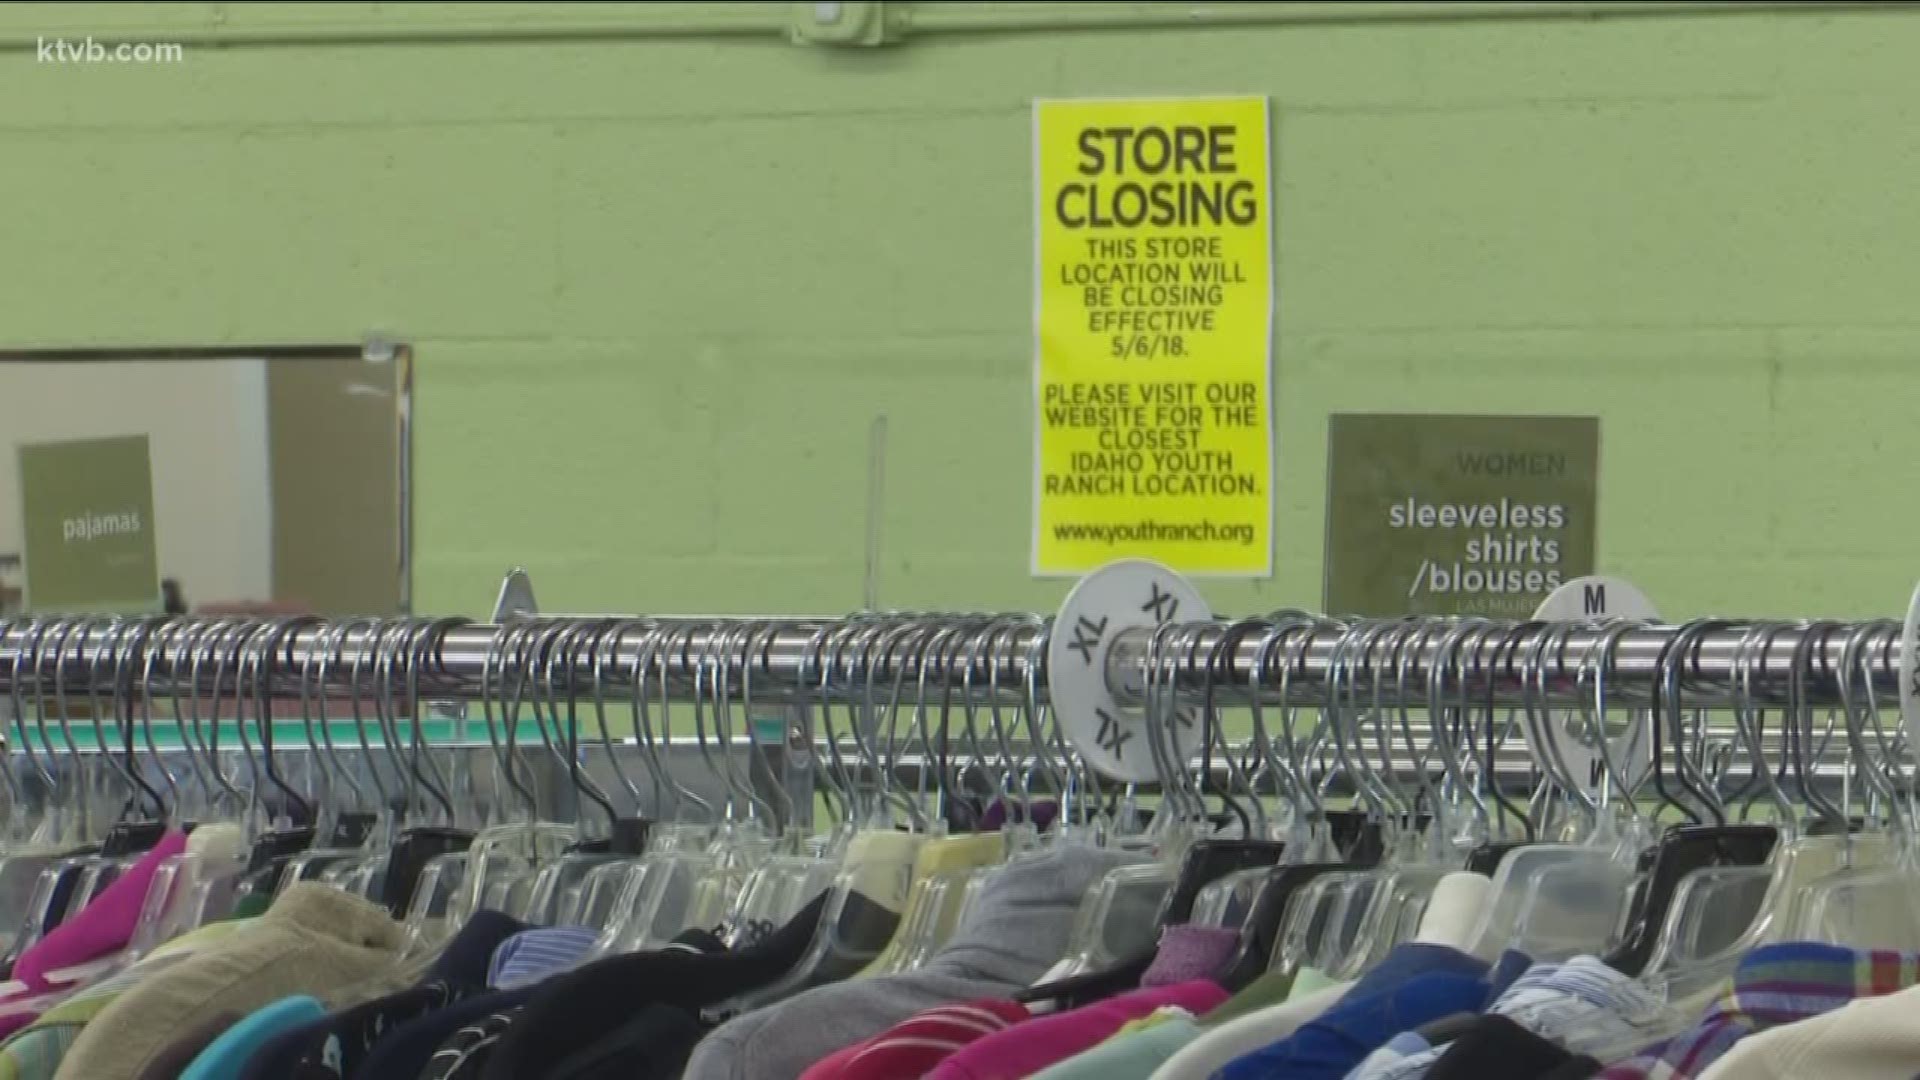 The nonprofit is closing some under-performing stores in Idaho.